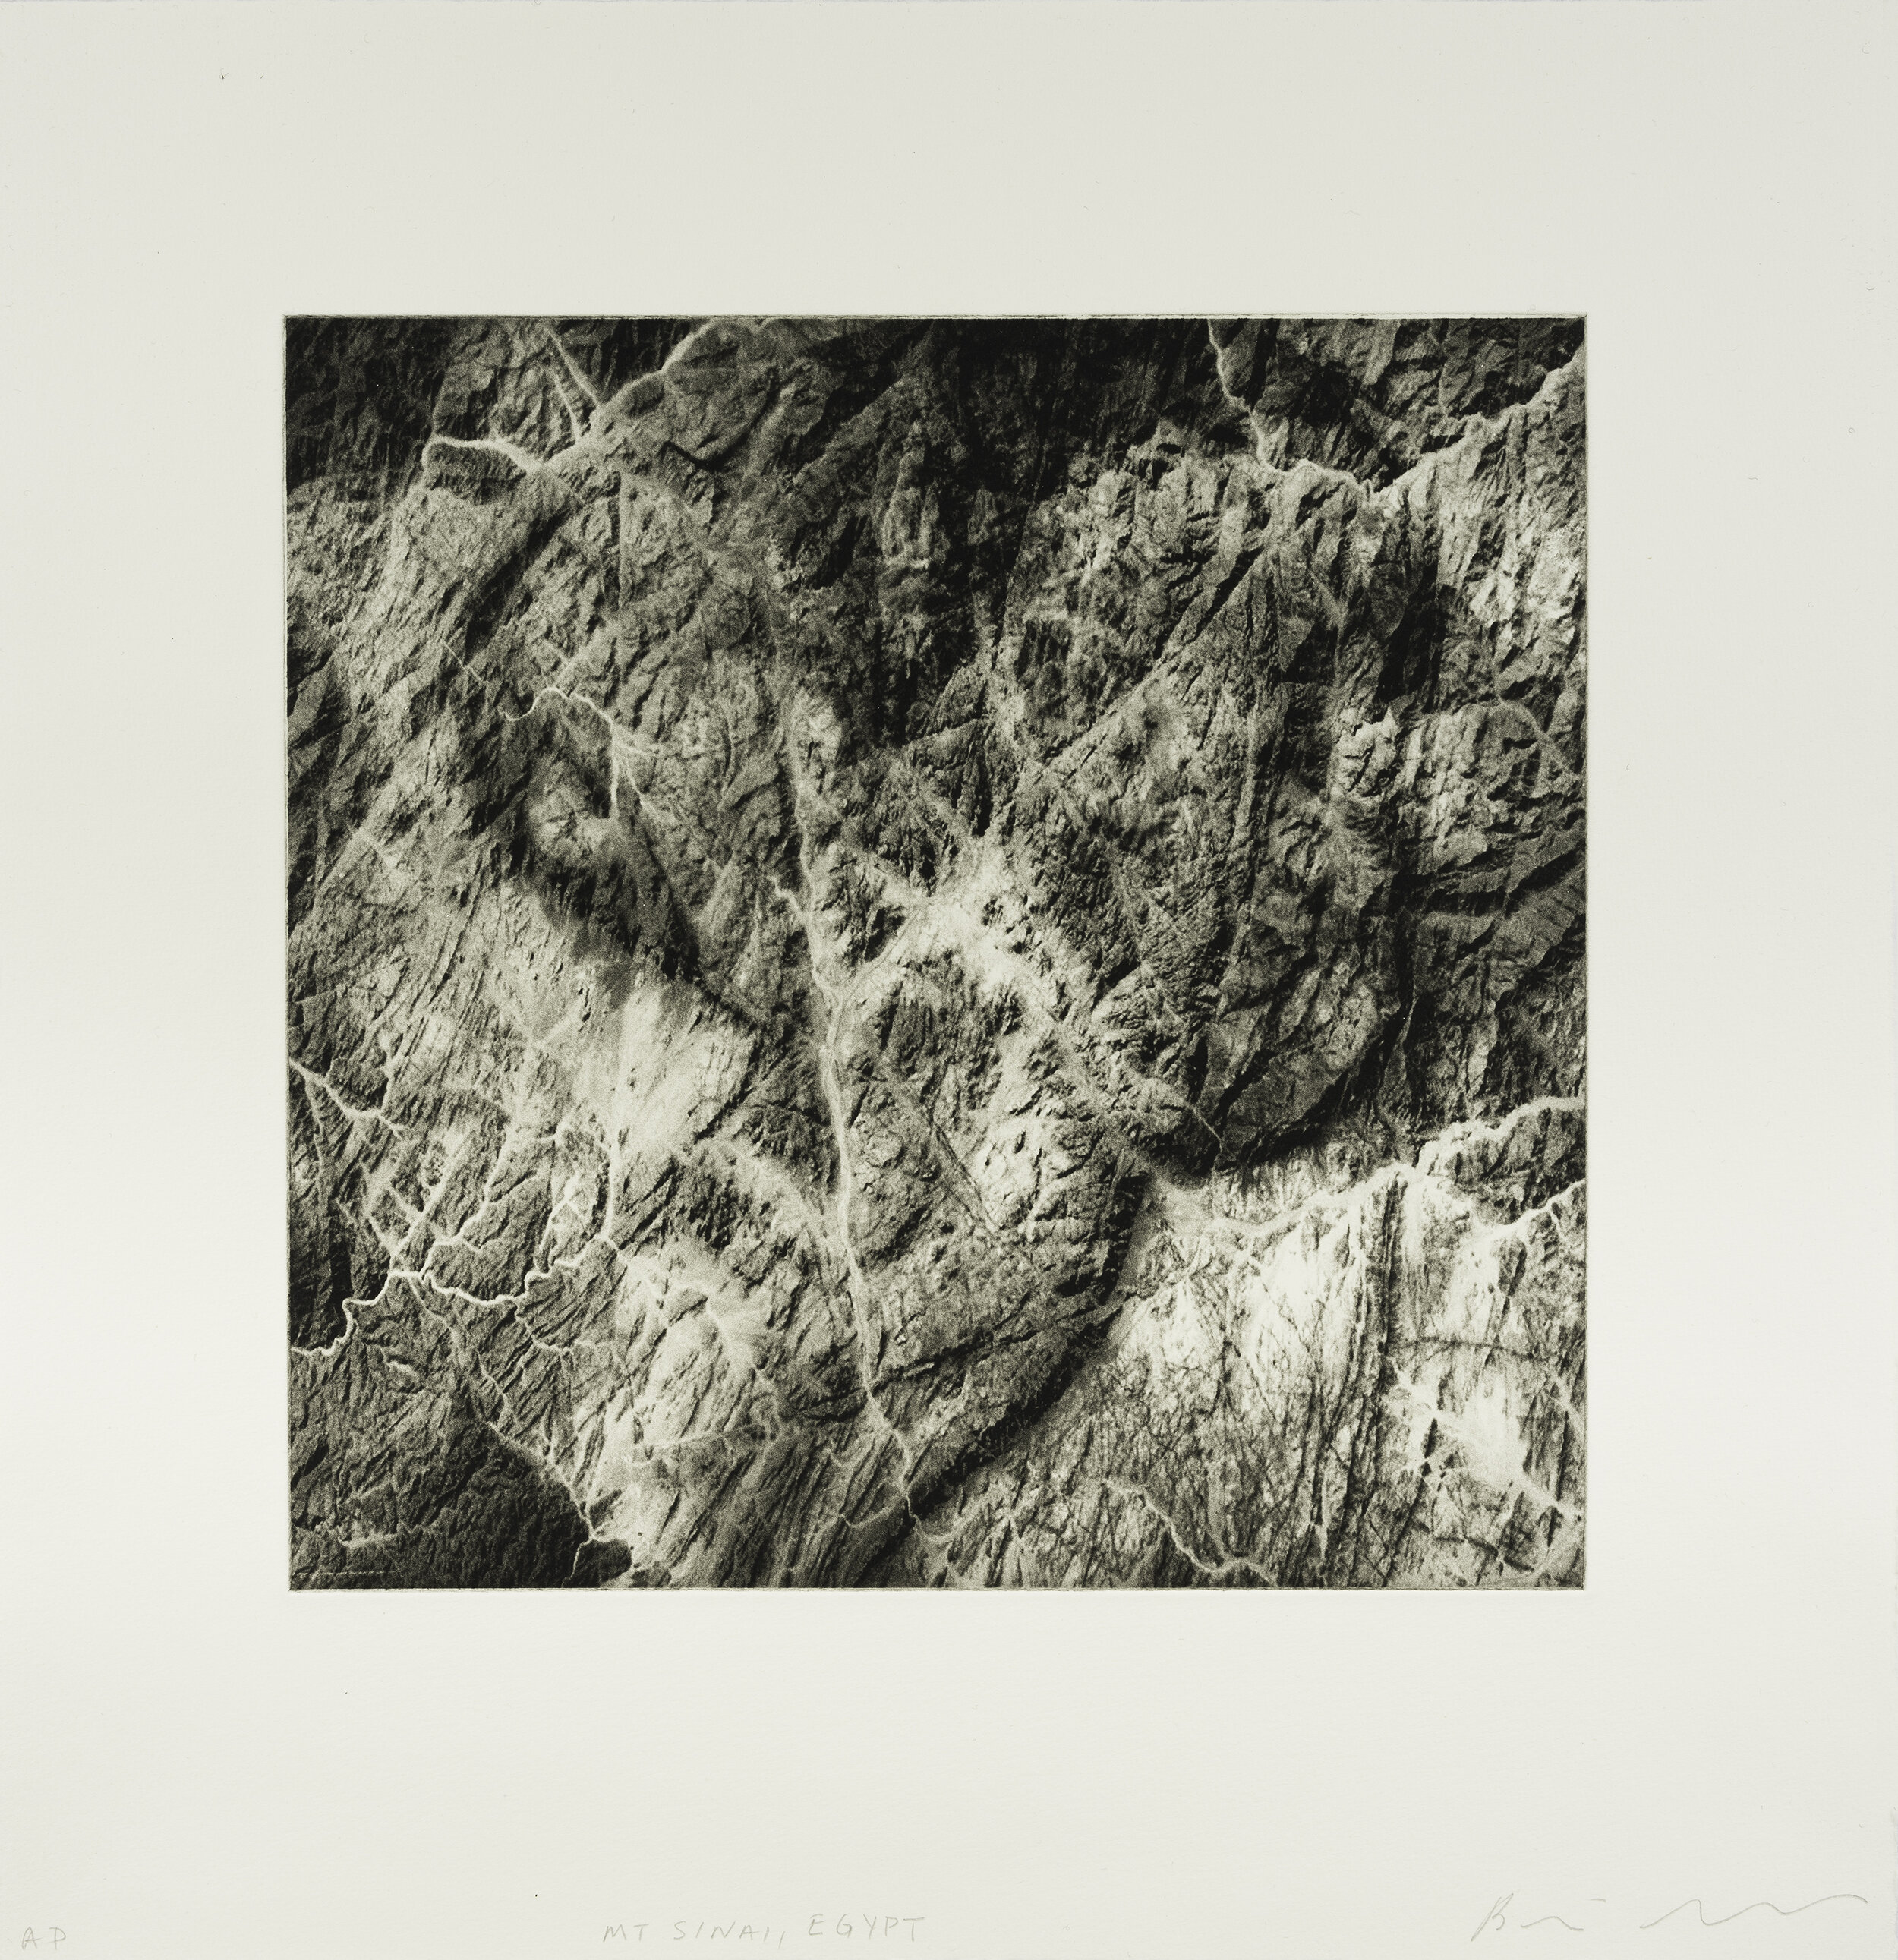    Mount Sinai, Egypt, 2019   Copperplate photogravure etching on cotton rag paper, plate size; 10.6” x 10.6”, paper size; 16” x 15.5”, edition 10  